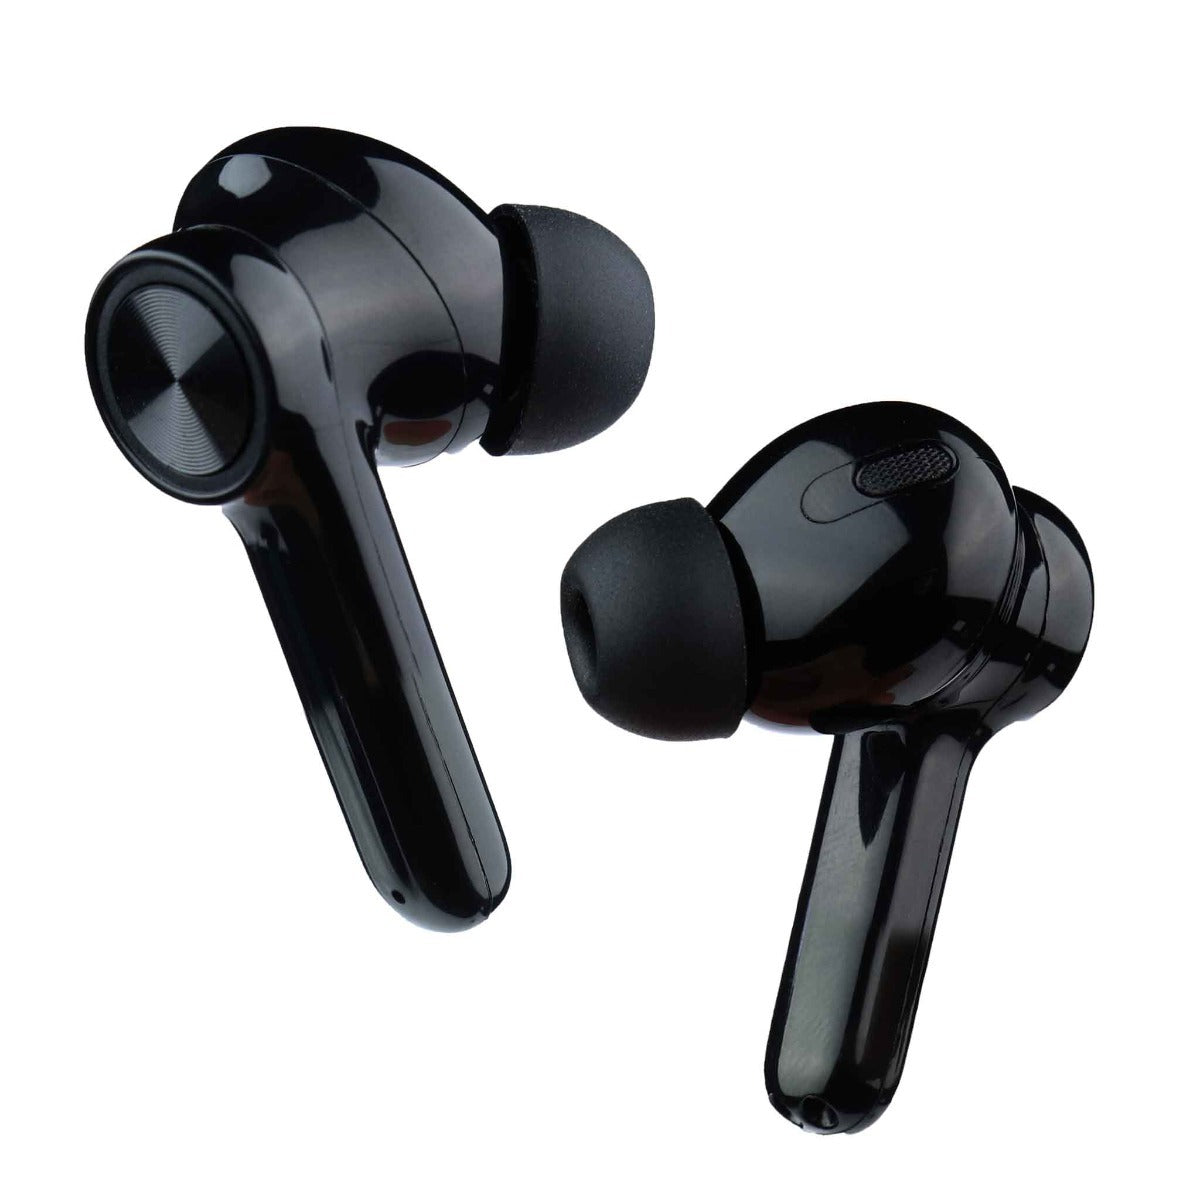 Kuurapods PRO V2 Black - true wireless earbuds with active noise cancellation